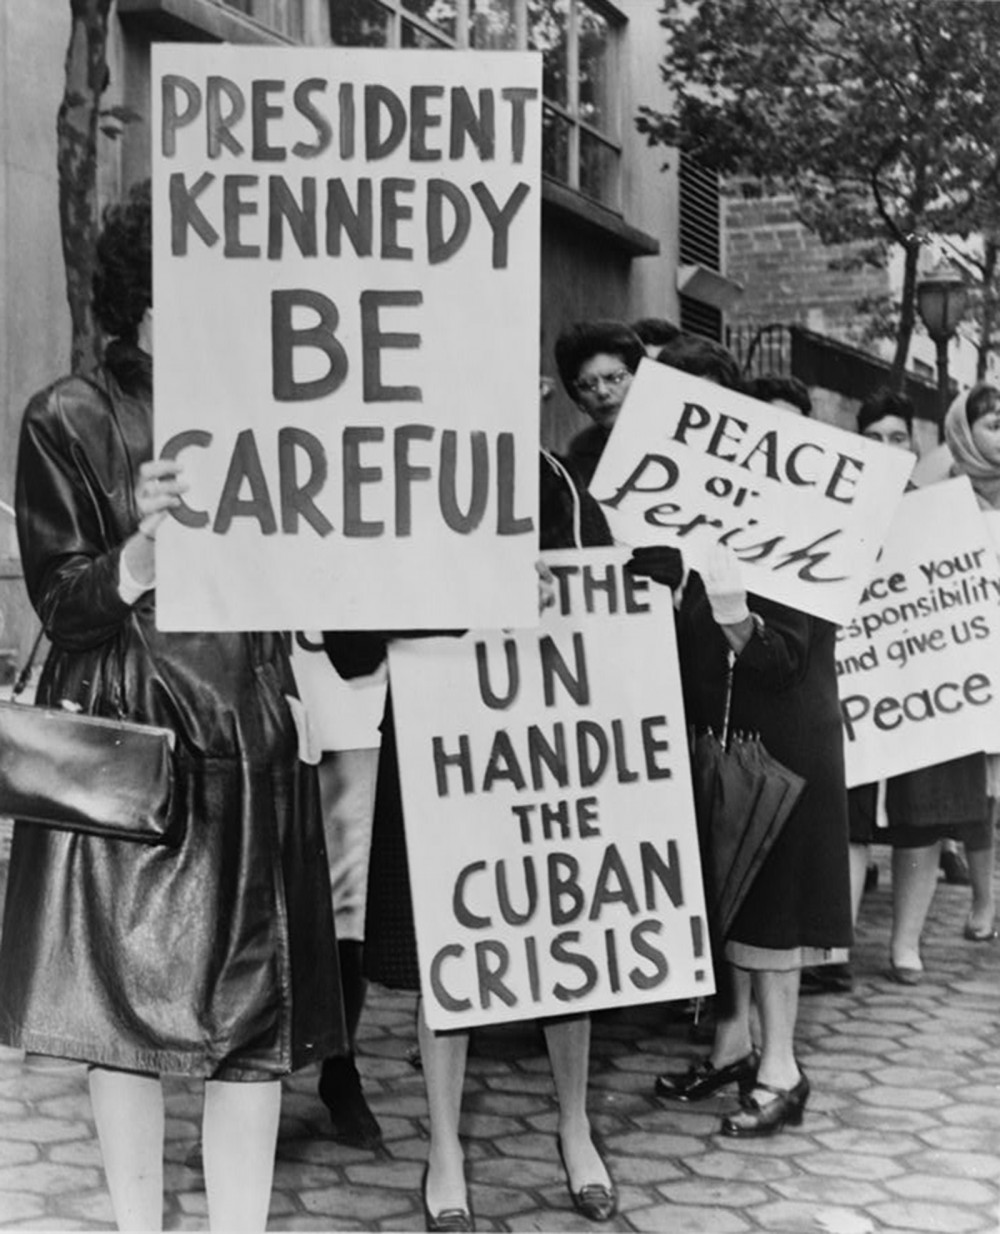 Protestors hold signs that read "President Kennedy Be Careful," "Let the UN Handle the Cuban Crisis!," "Peace or Perish," and "[unclear] your responsibility and give us peace."